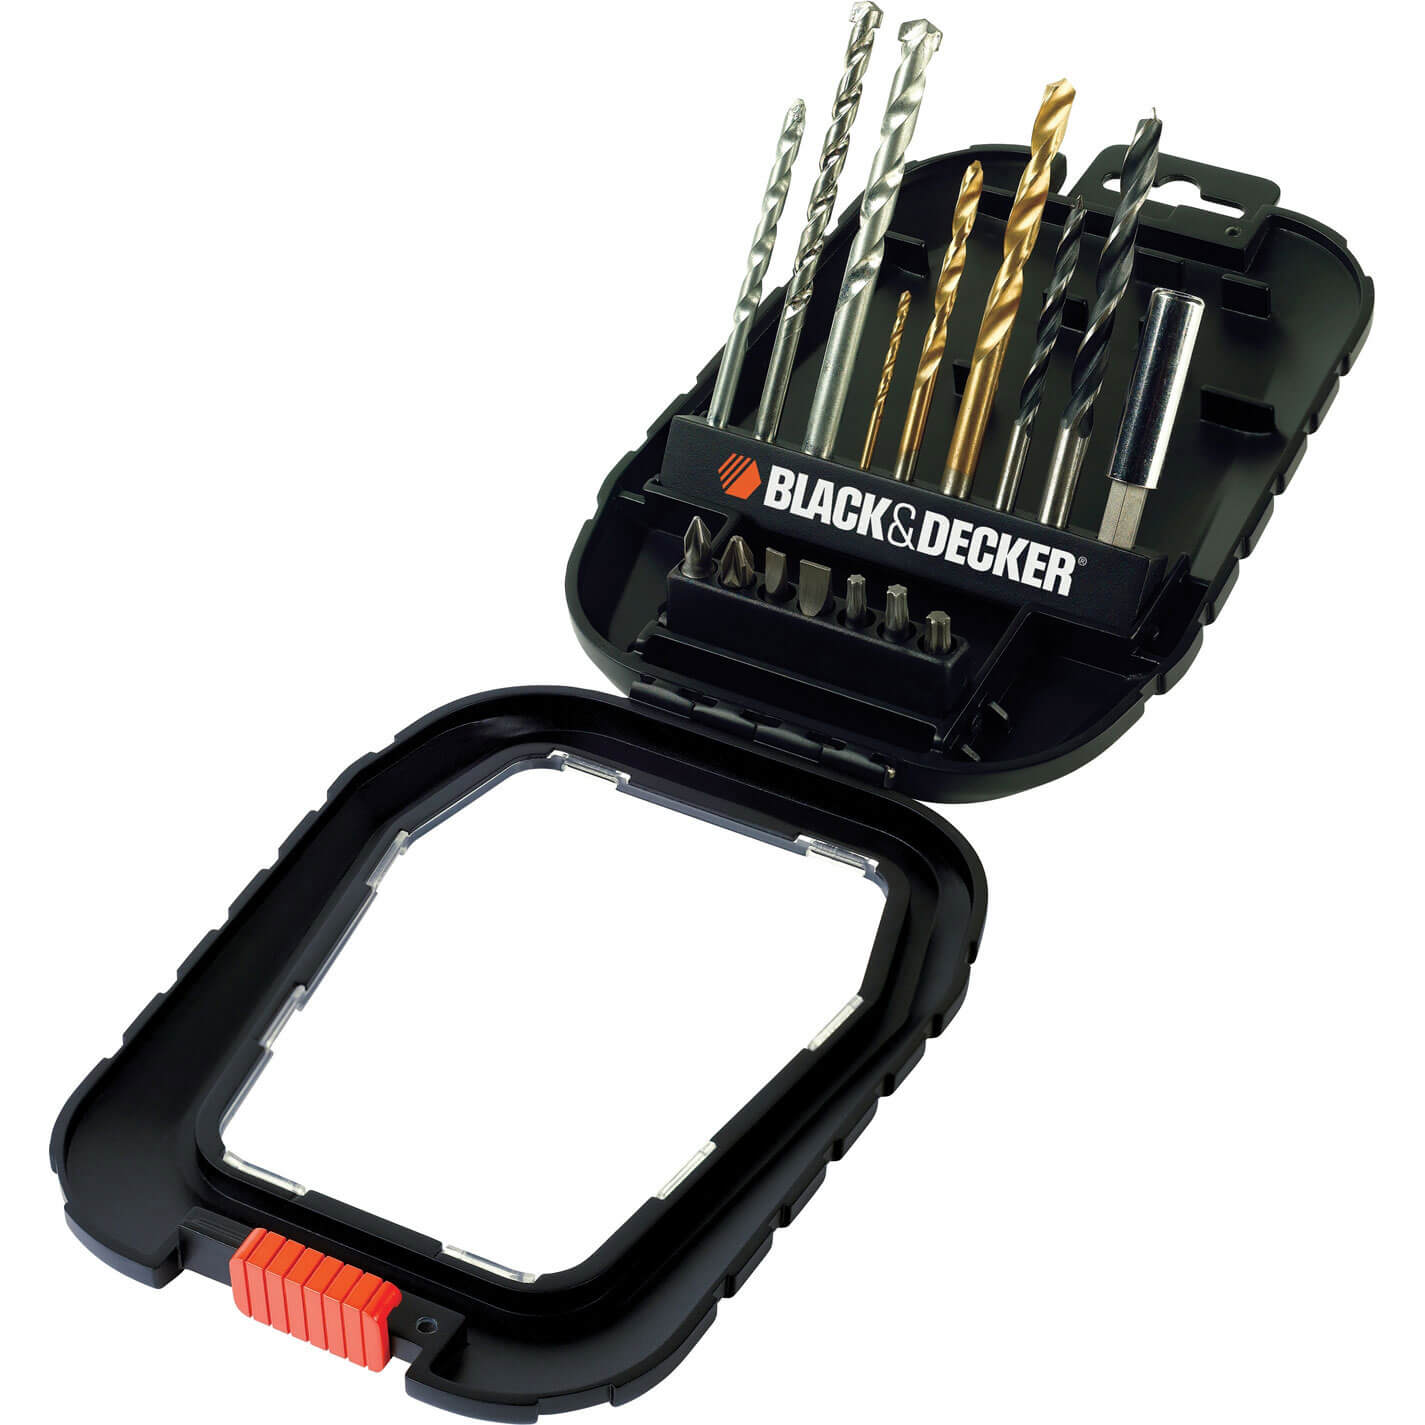 Image of Black and Decker A7186 16 Piece Drill and Screwdriver Bit Set